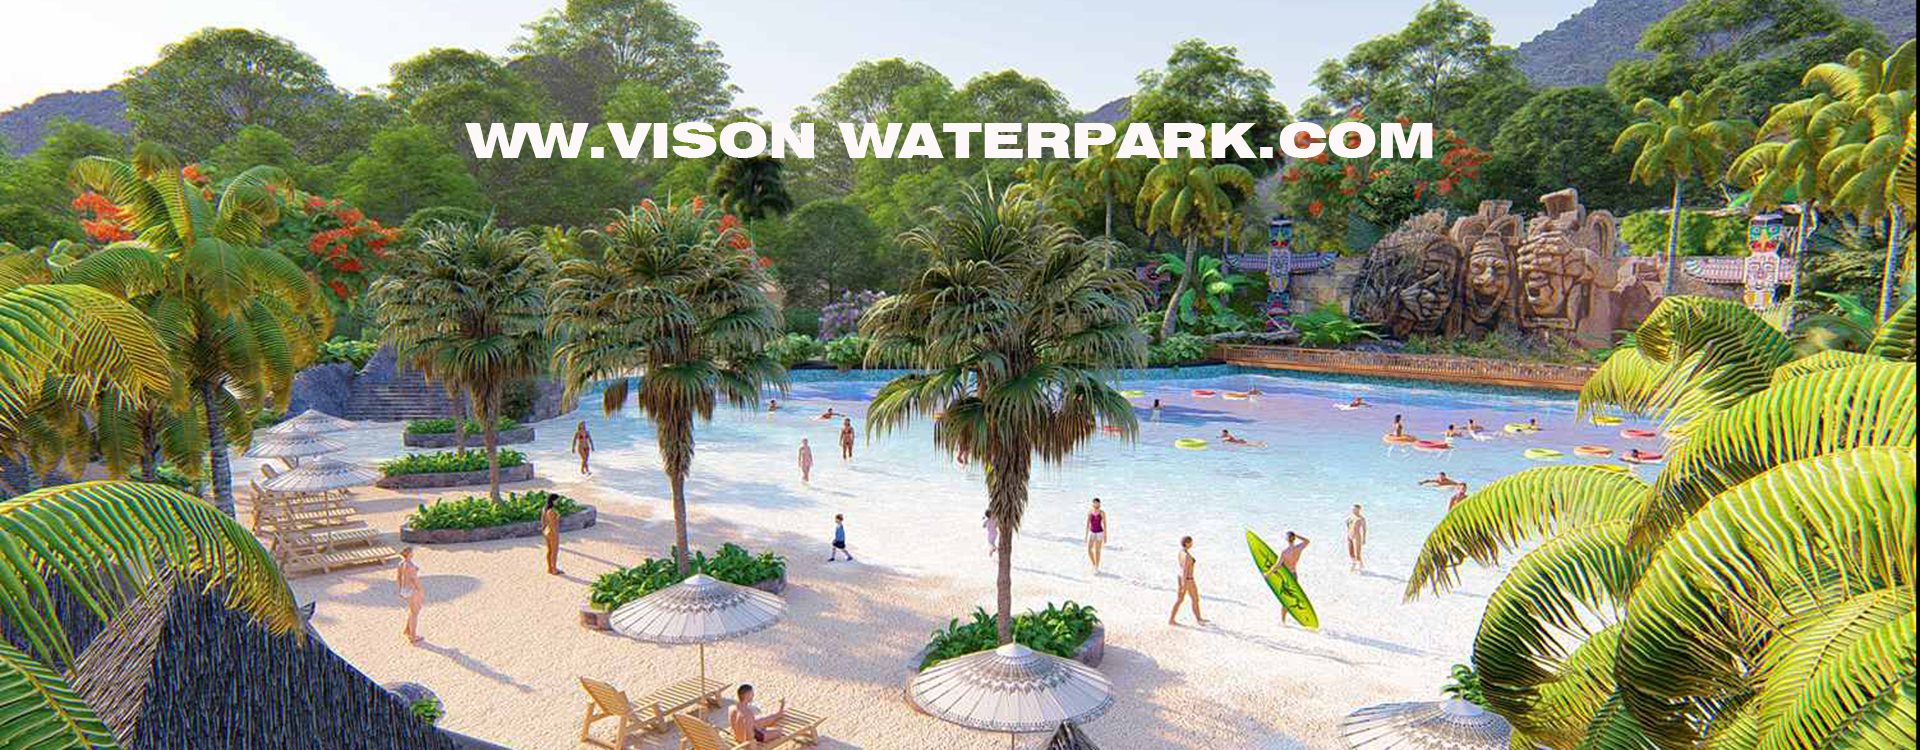 Idea of water park investment